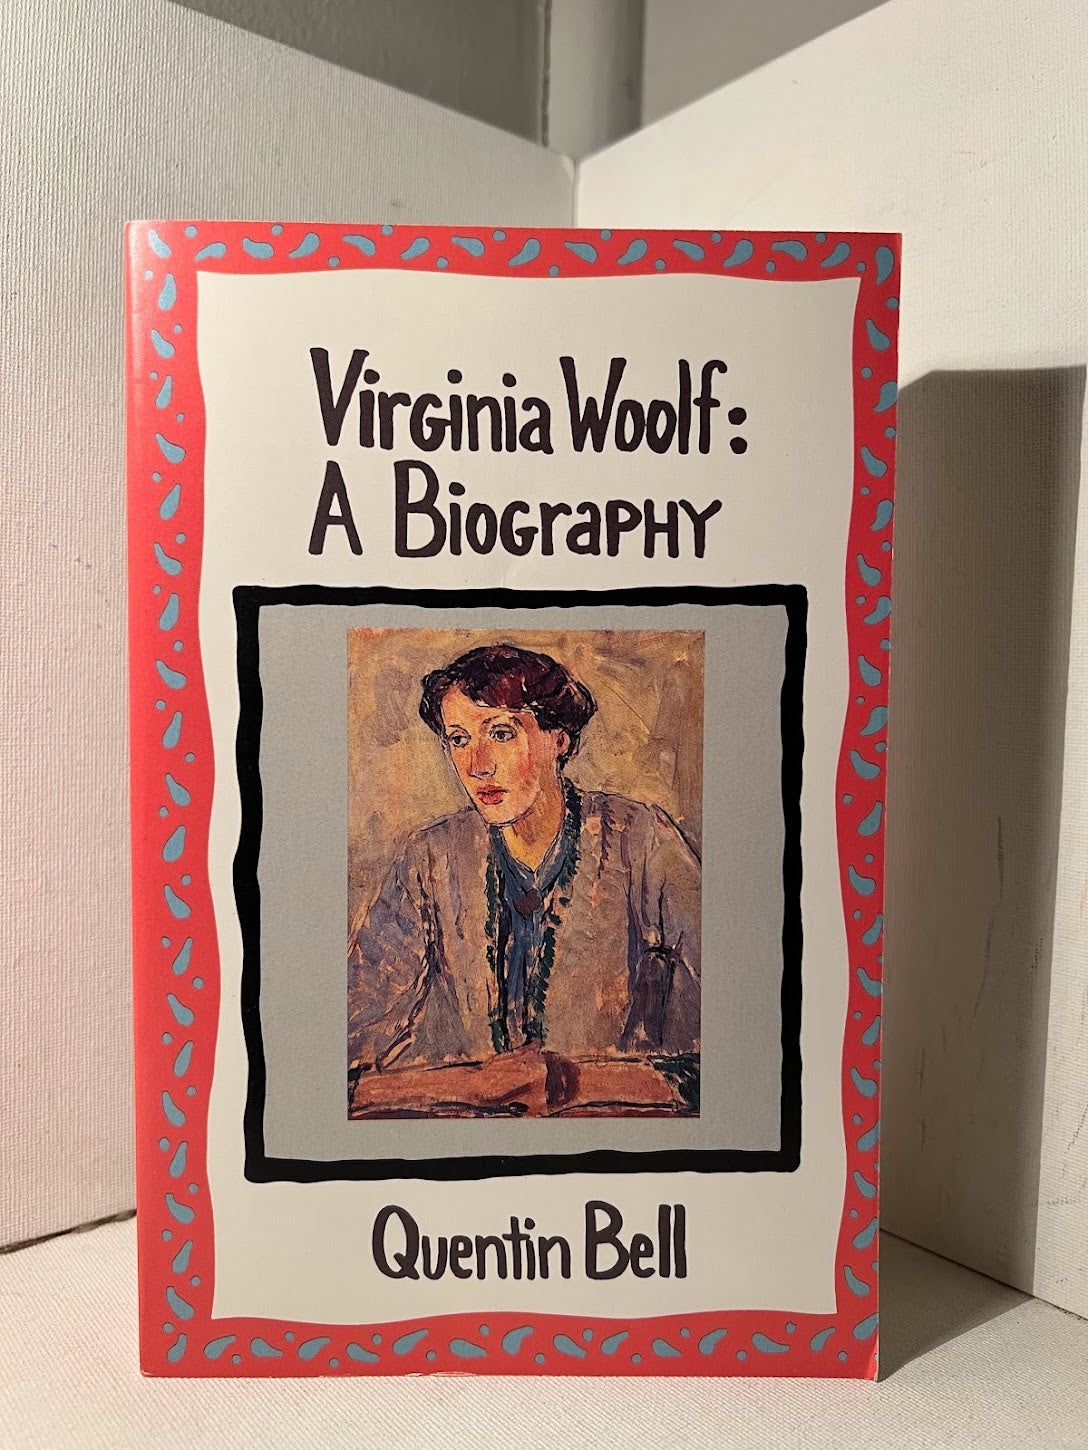 Virginia Woolf: A Biography by Quentin Bell